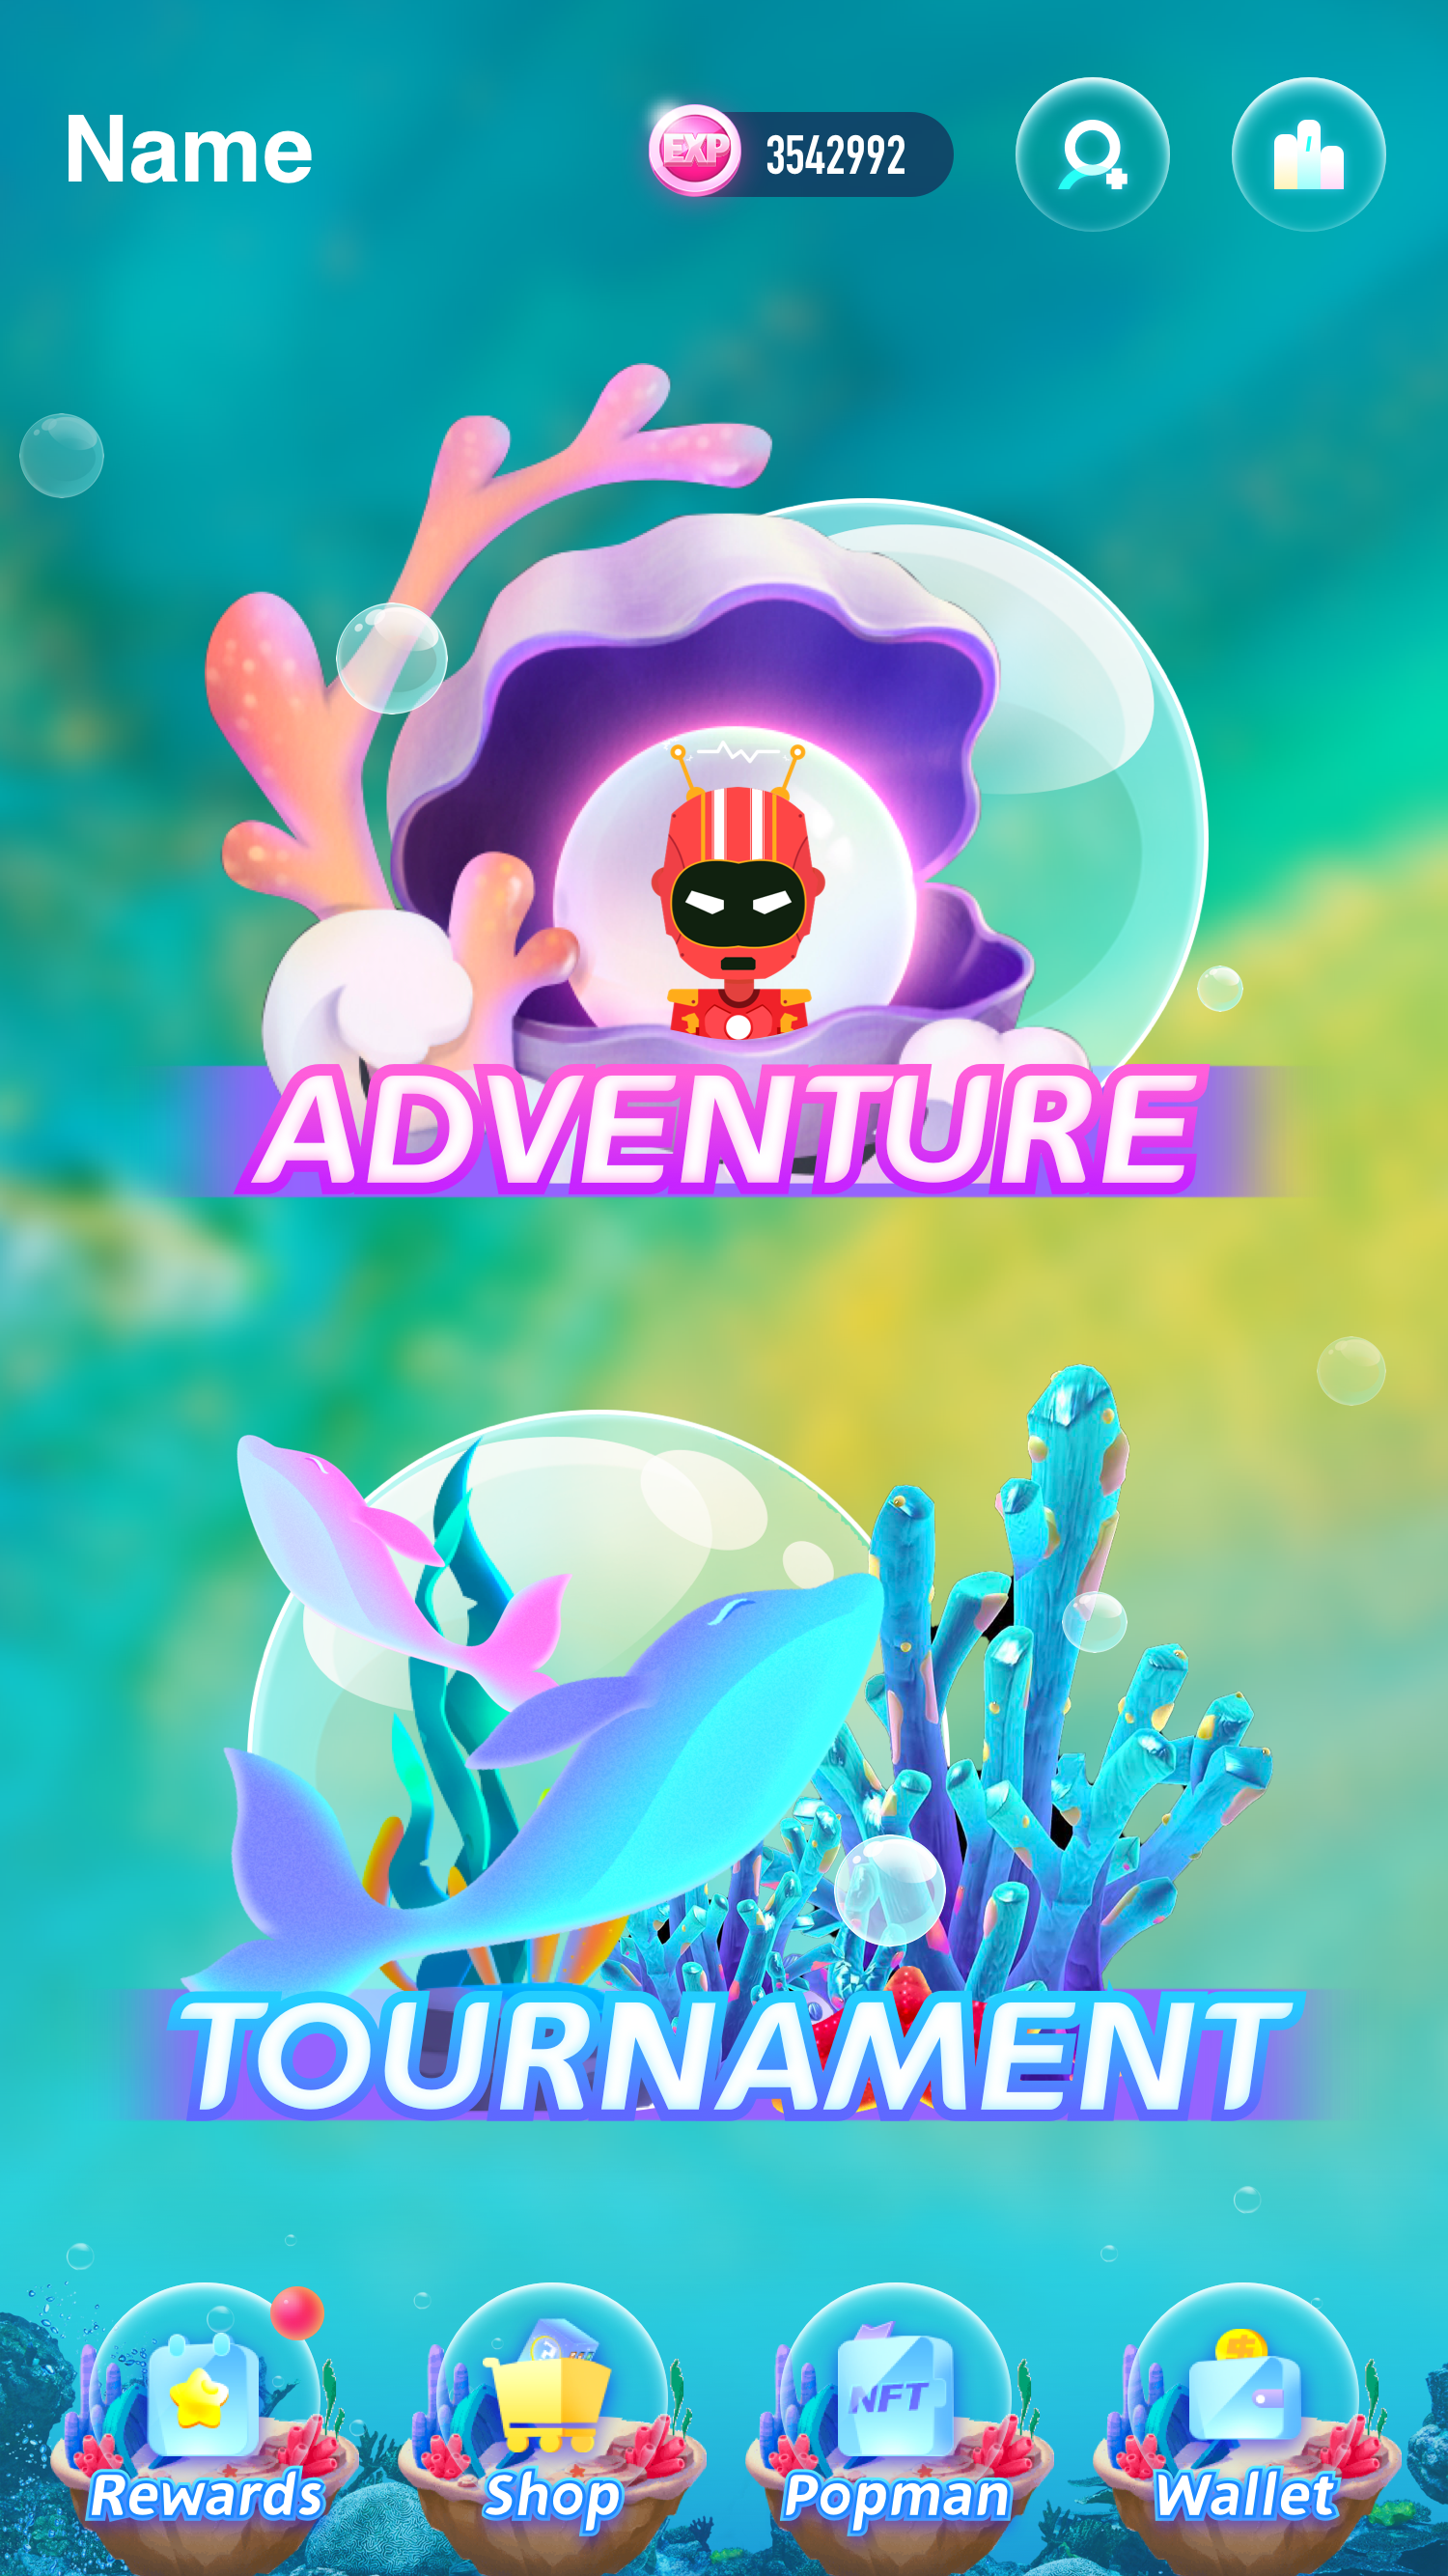 game image from Popop World